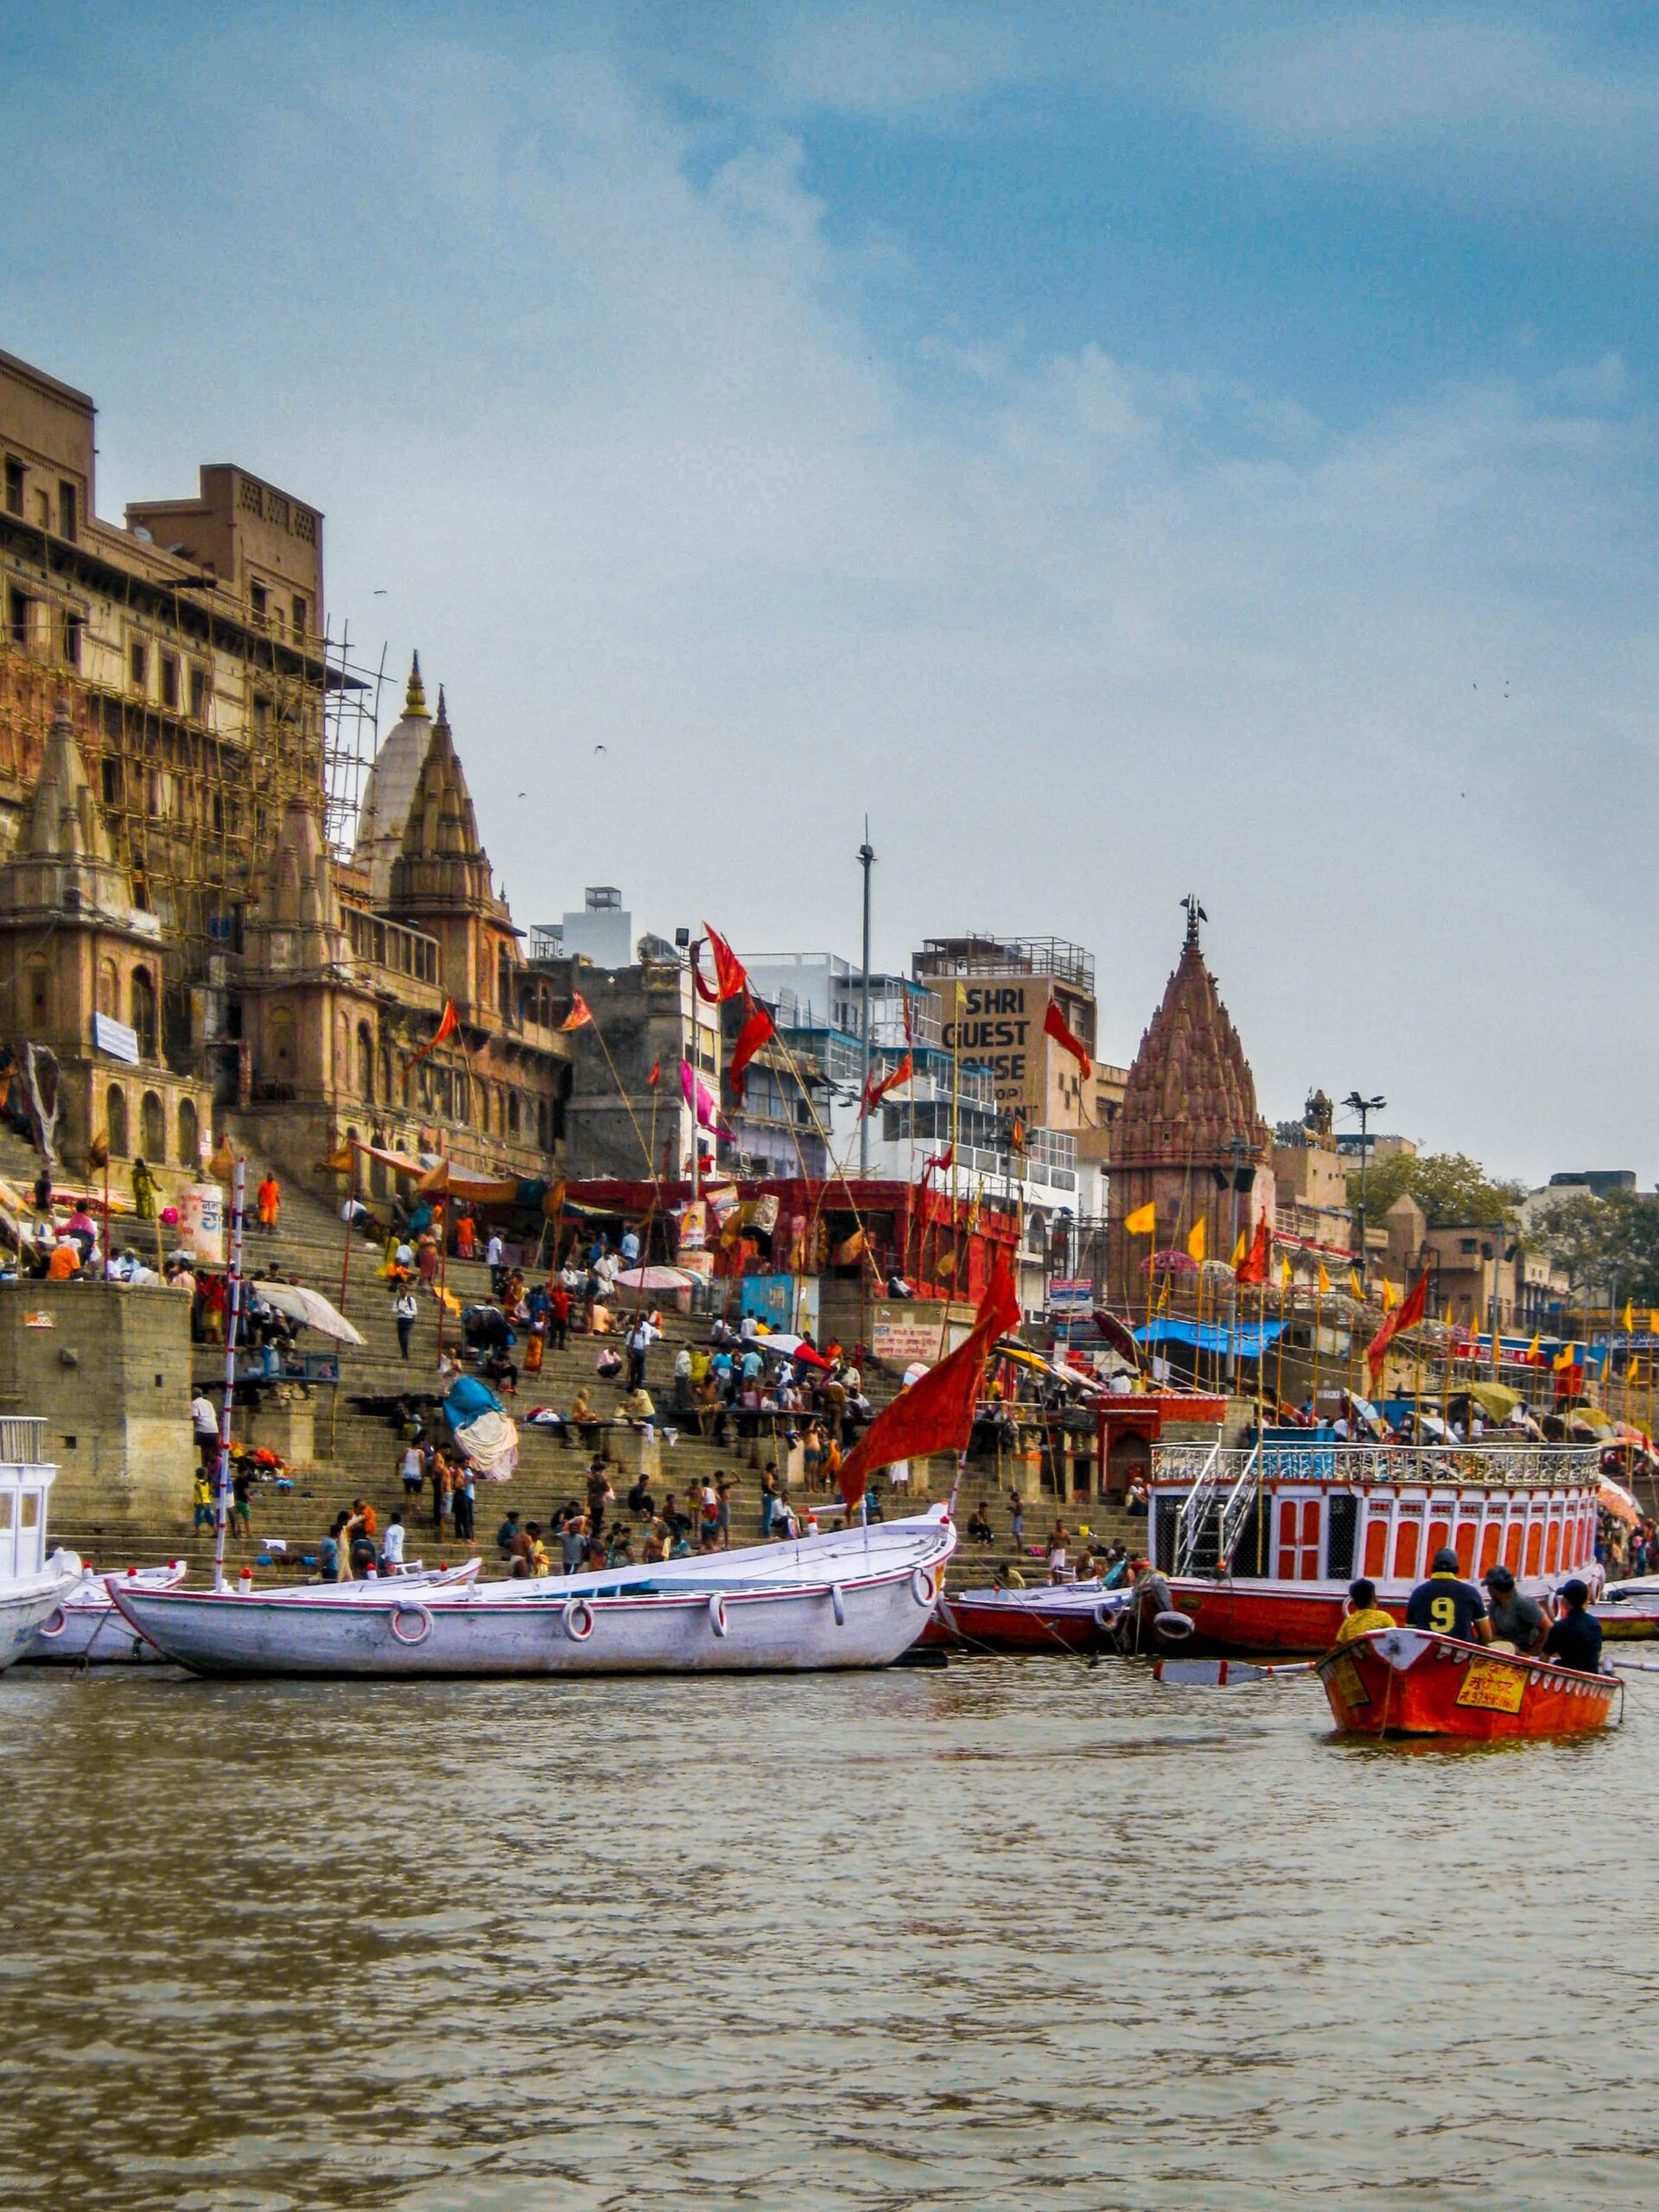 10 Things Visitors Should be Aware of Before Travelling to India